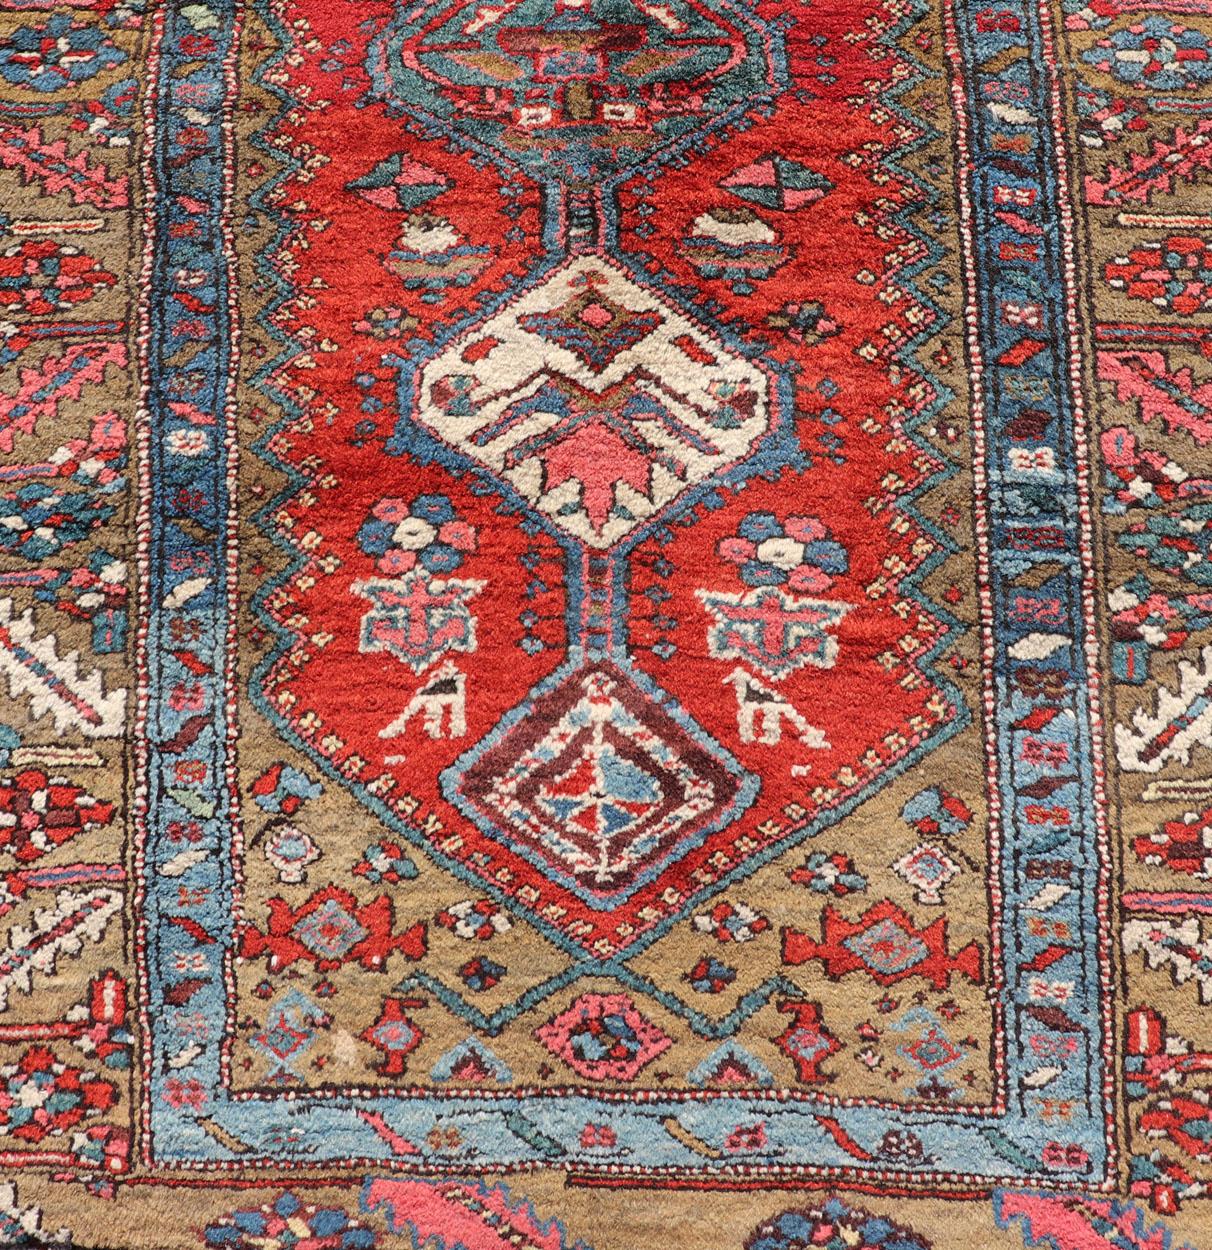 Antique Persian Heriz Runner in Reds, Blues, Pink, Ivory and Earthy Tones For Sale 4